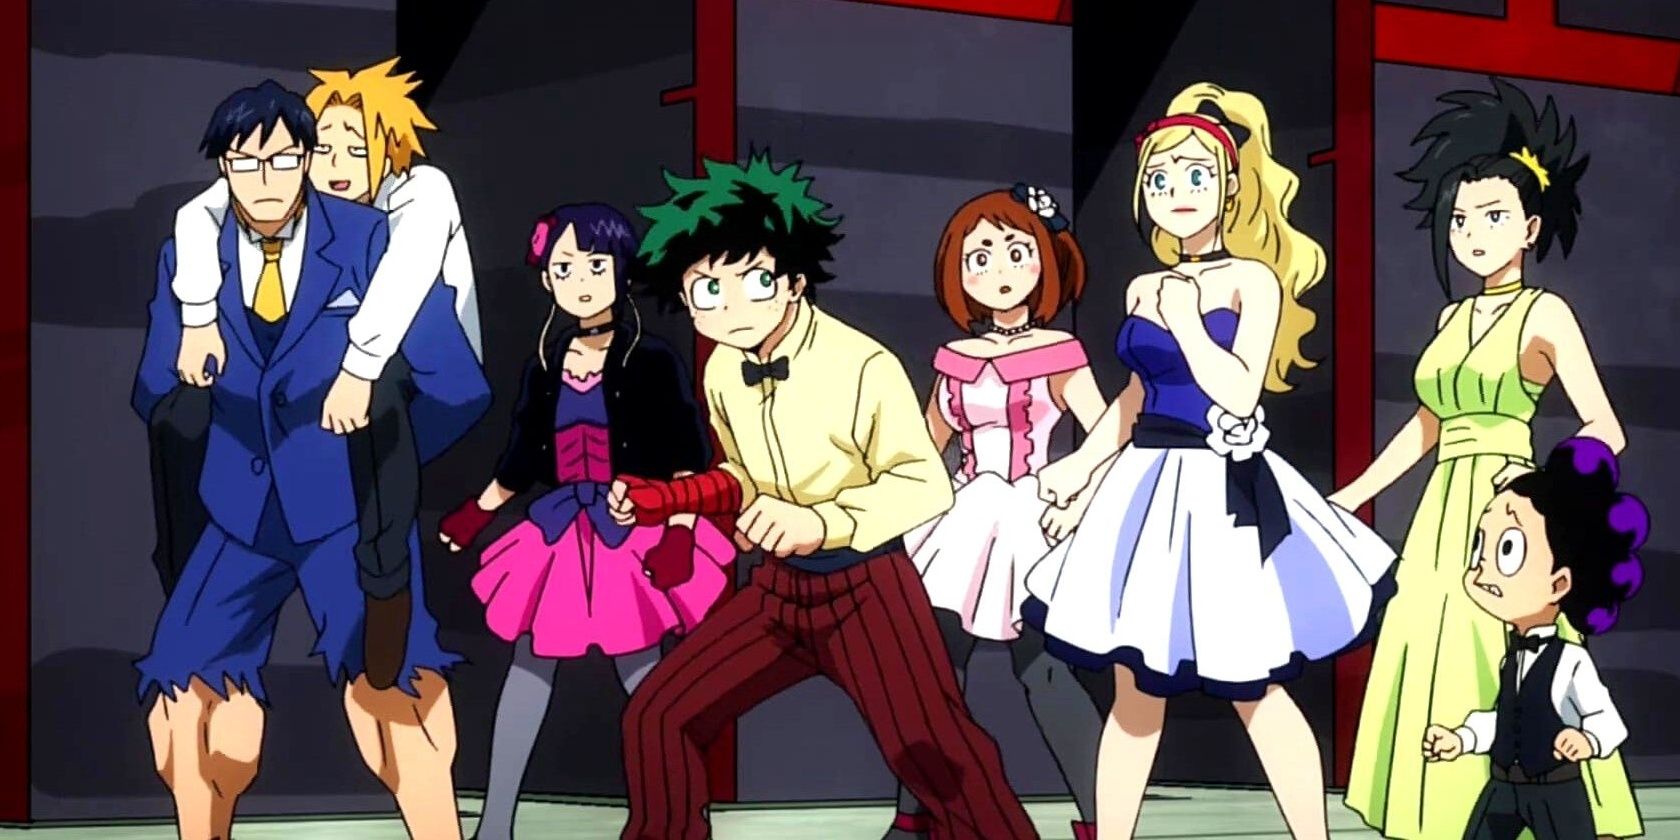 Class 1-A from My Hero Academia: Two Heroes